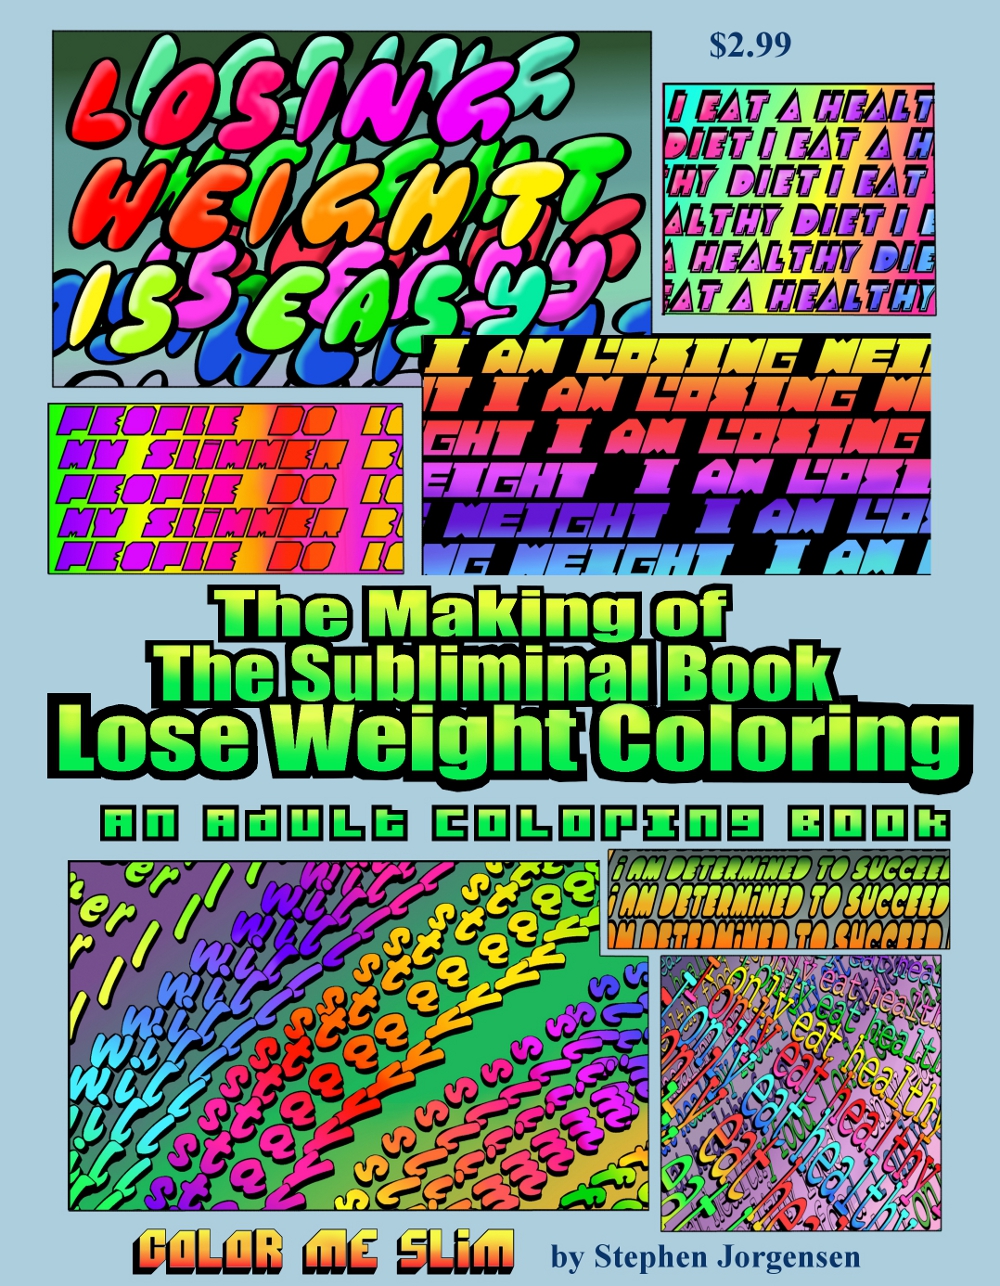 FREE: The Making of the Subliminal Book, Lose Weight Coloring    An Illustrated Book for Adults by Stephen Jorgensen